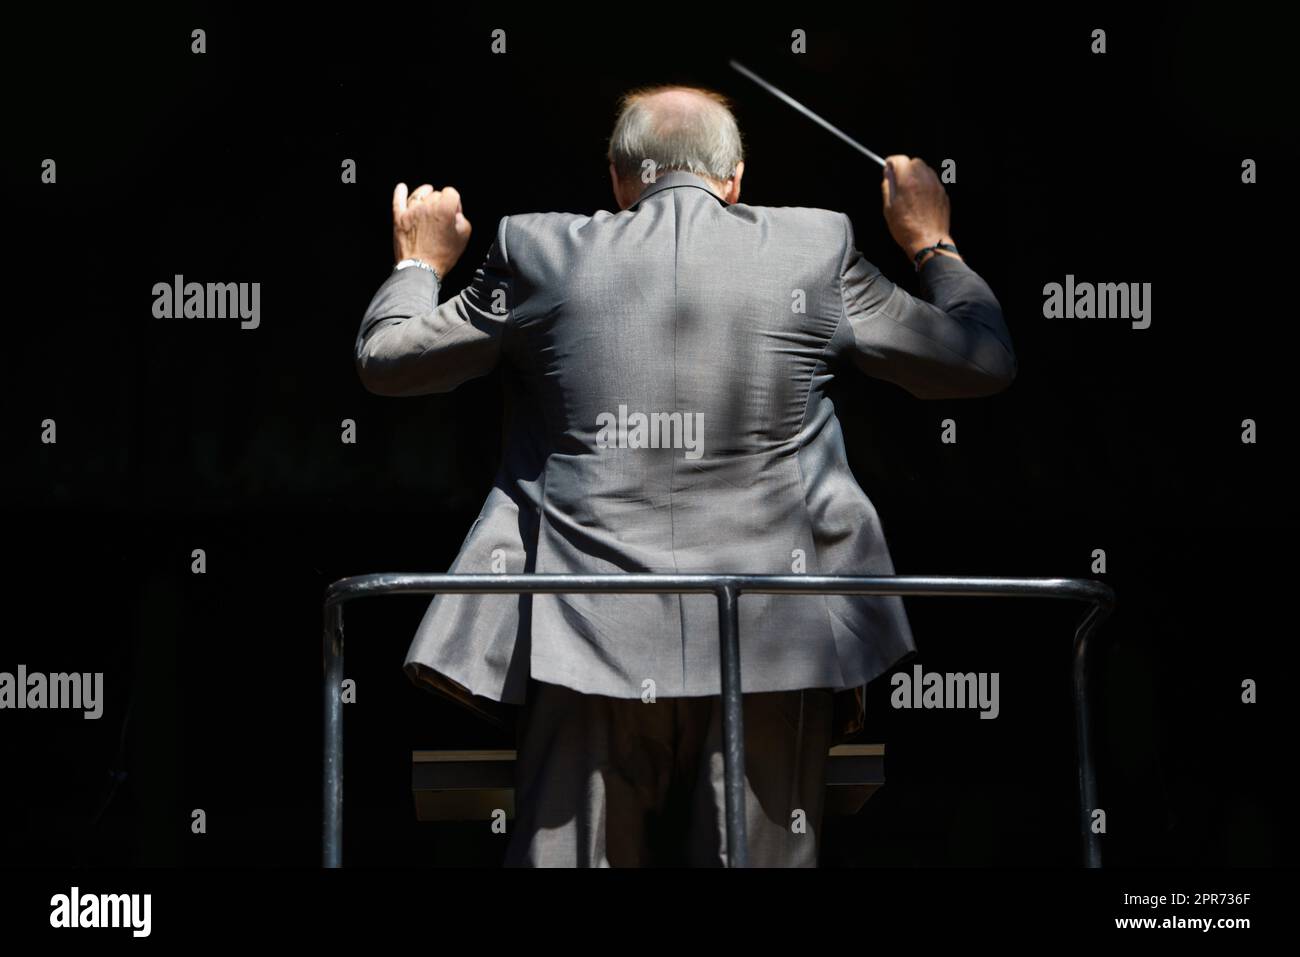 Guiding the music. Cropped rear view of an orchestra conductor waving his baton. Stock Photo